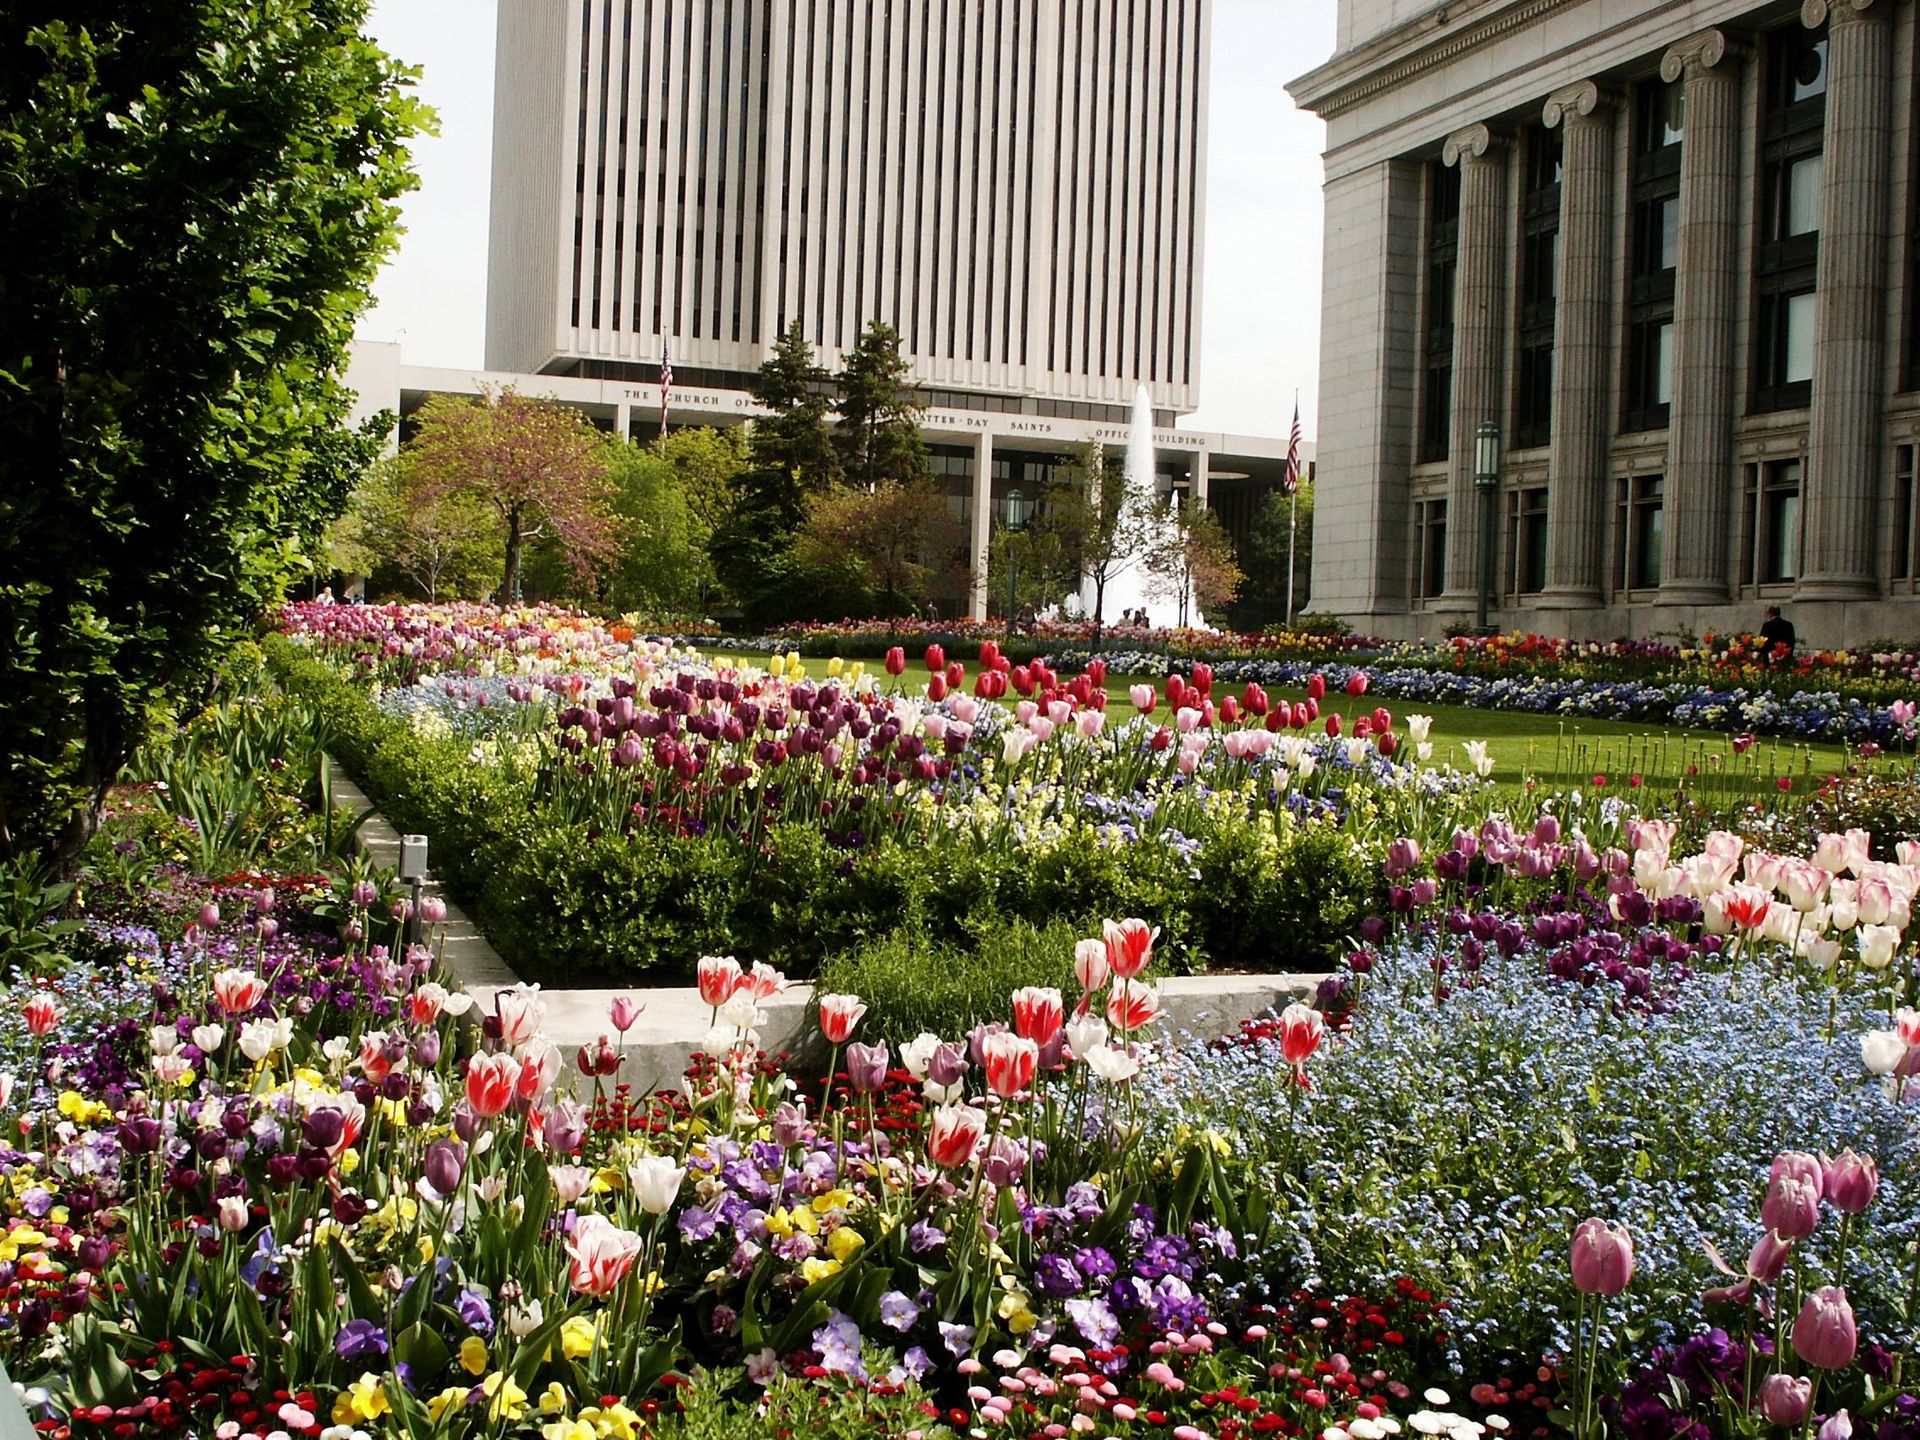 The flower beds next to the Church Administration Building filled with spring flowers.